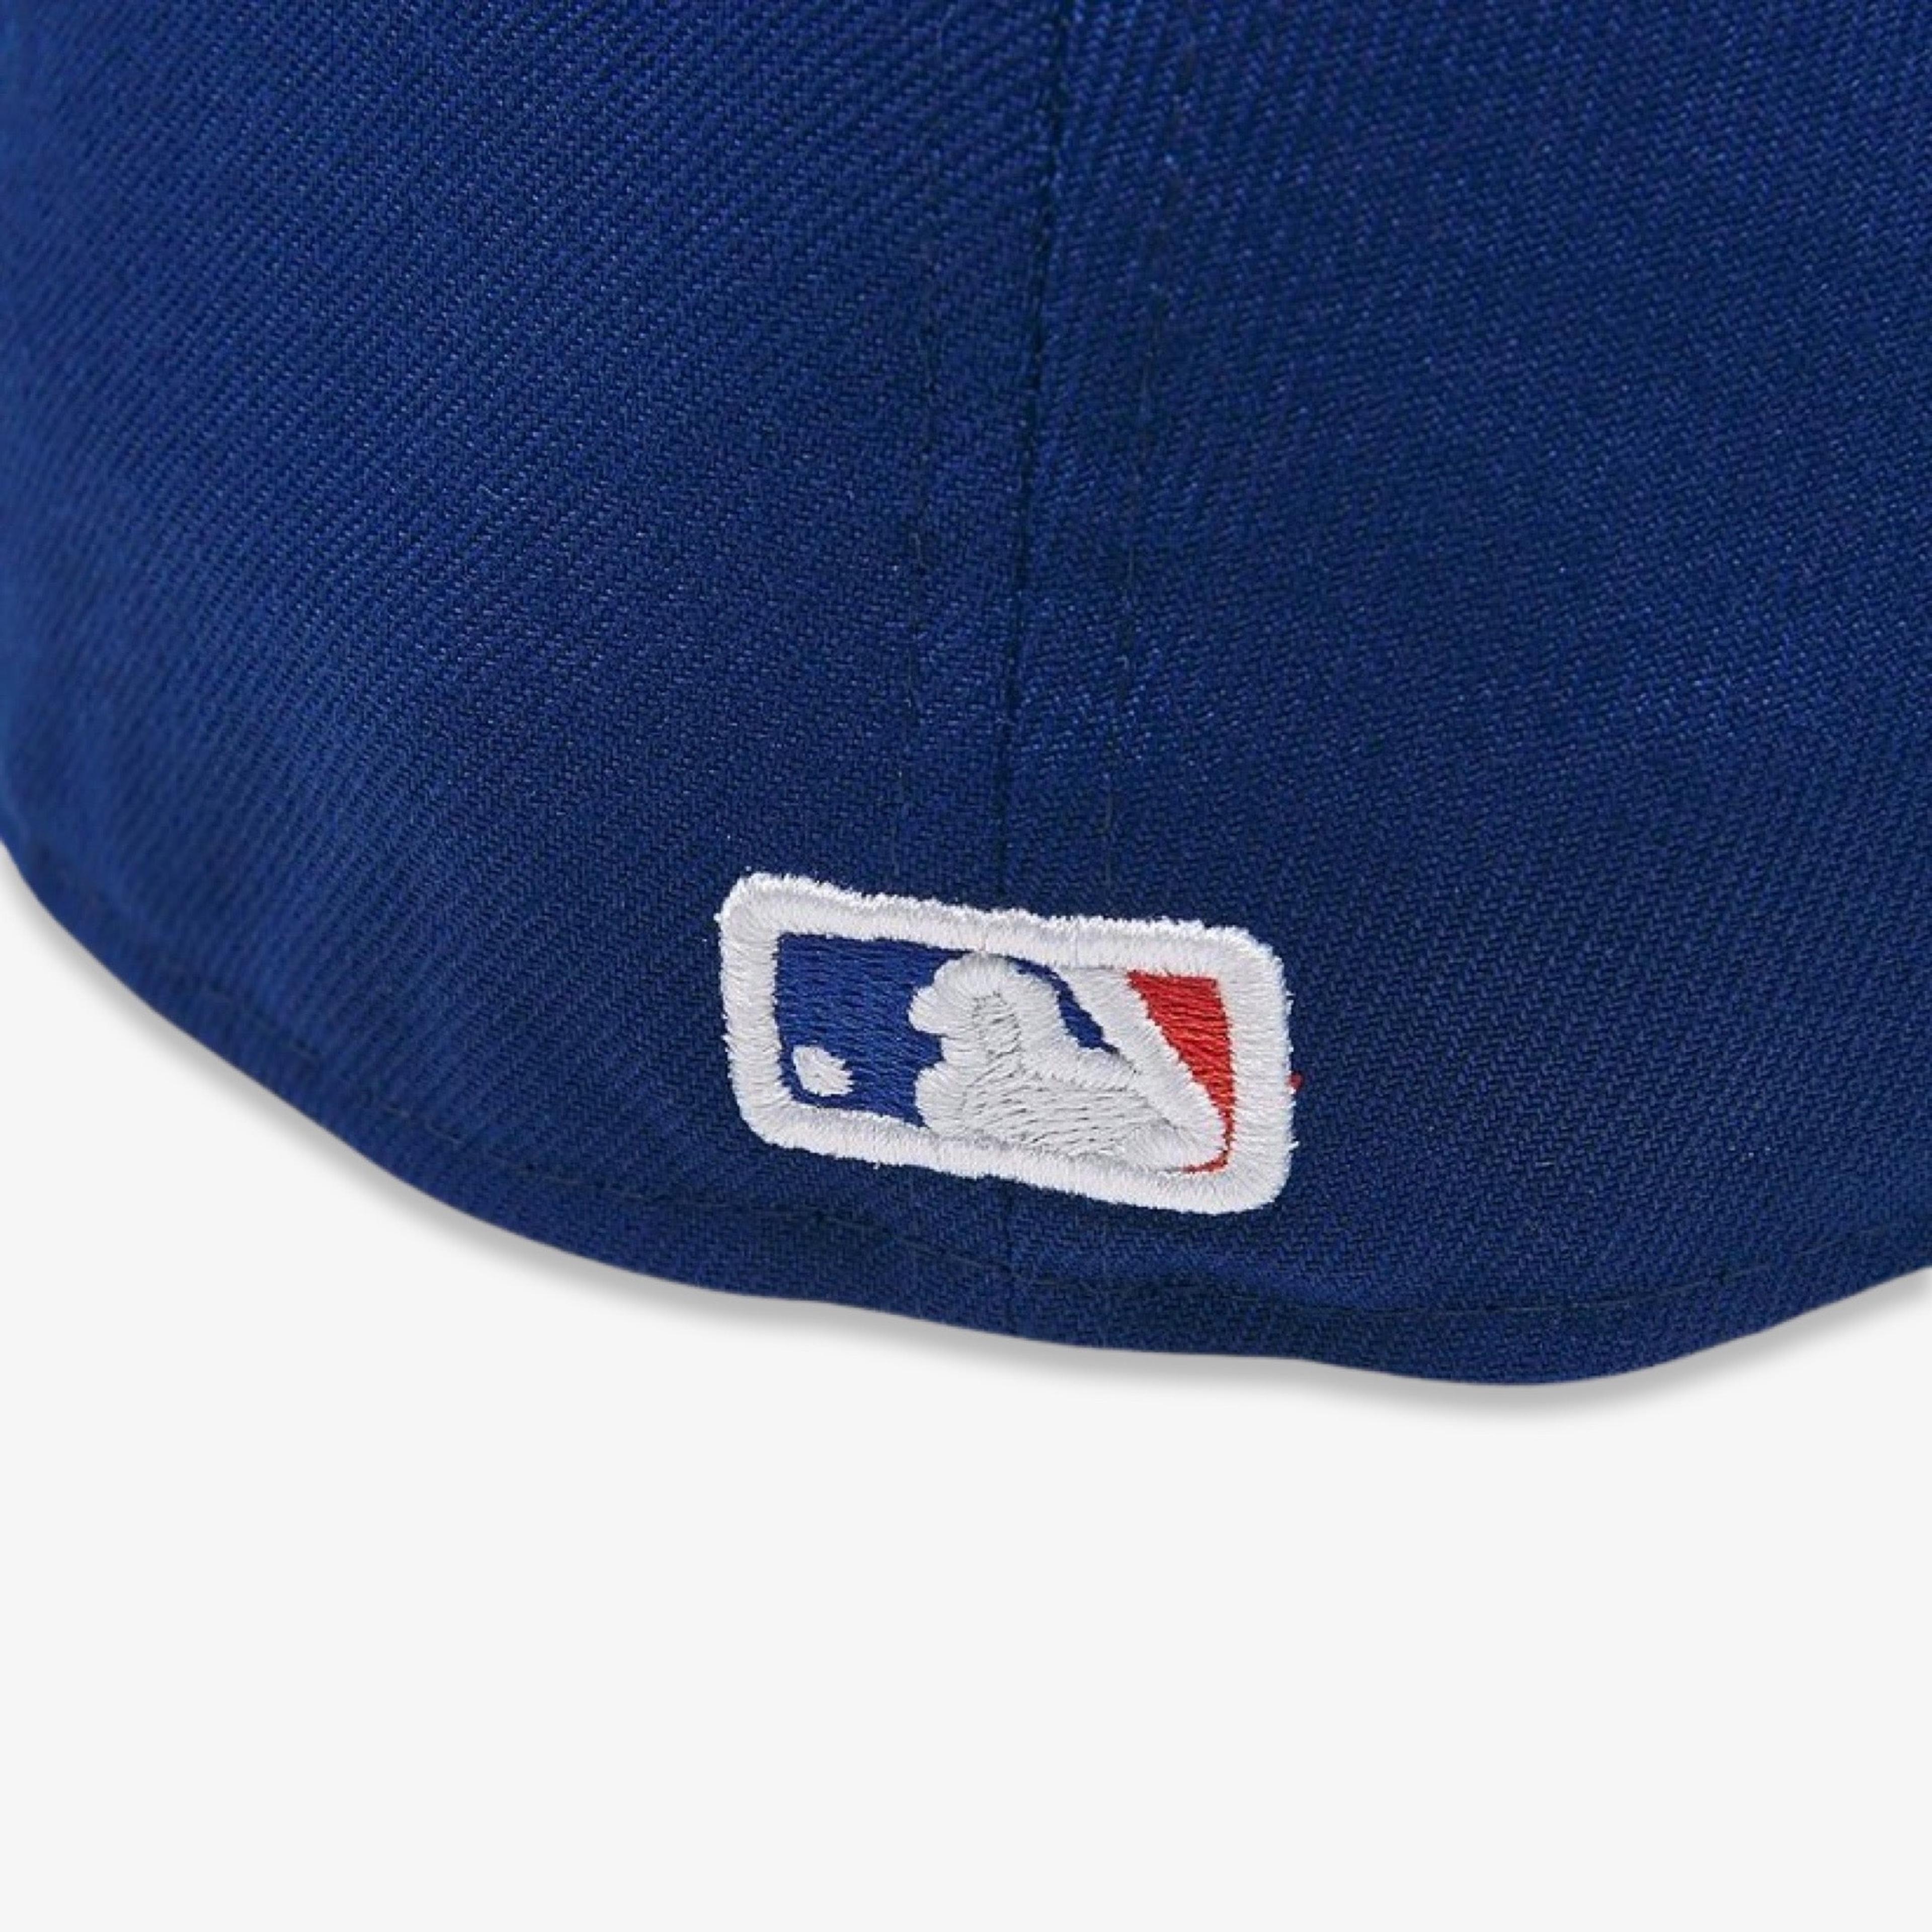 Alternate View 5 of New Era x MLB 'New York Mets' 59Fifty Patch Fitted Hat SS17